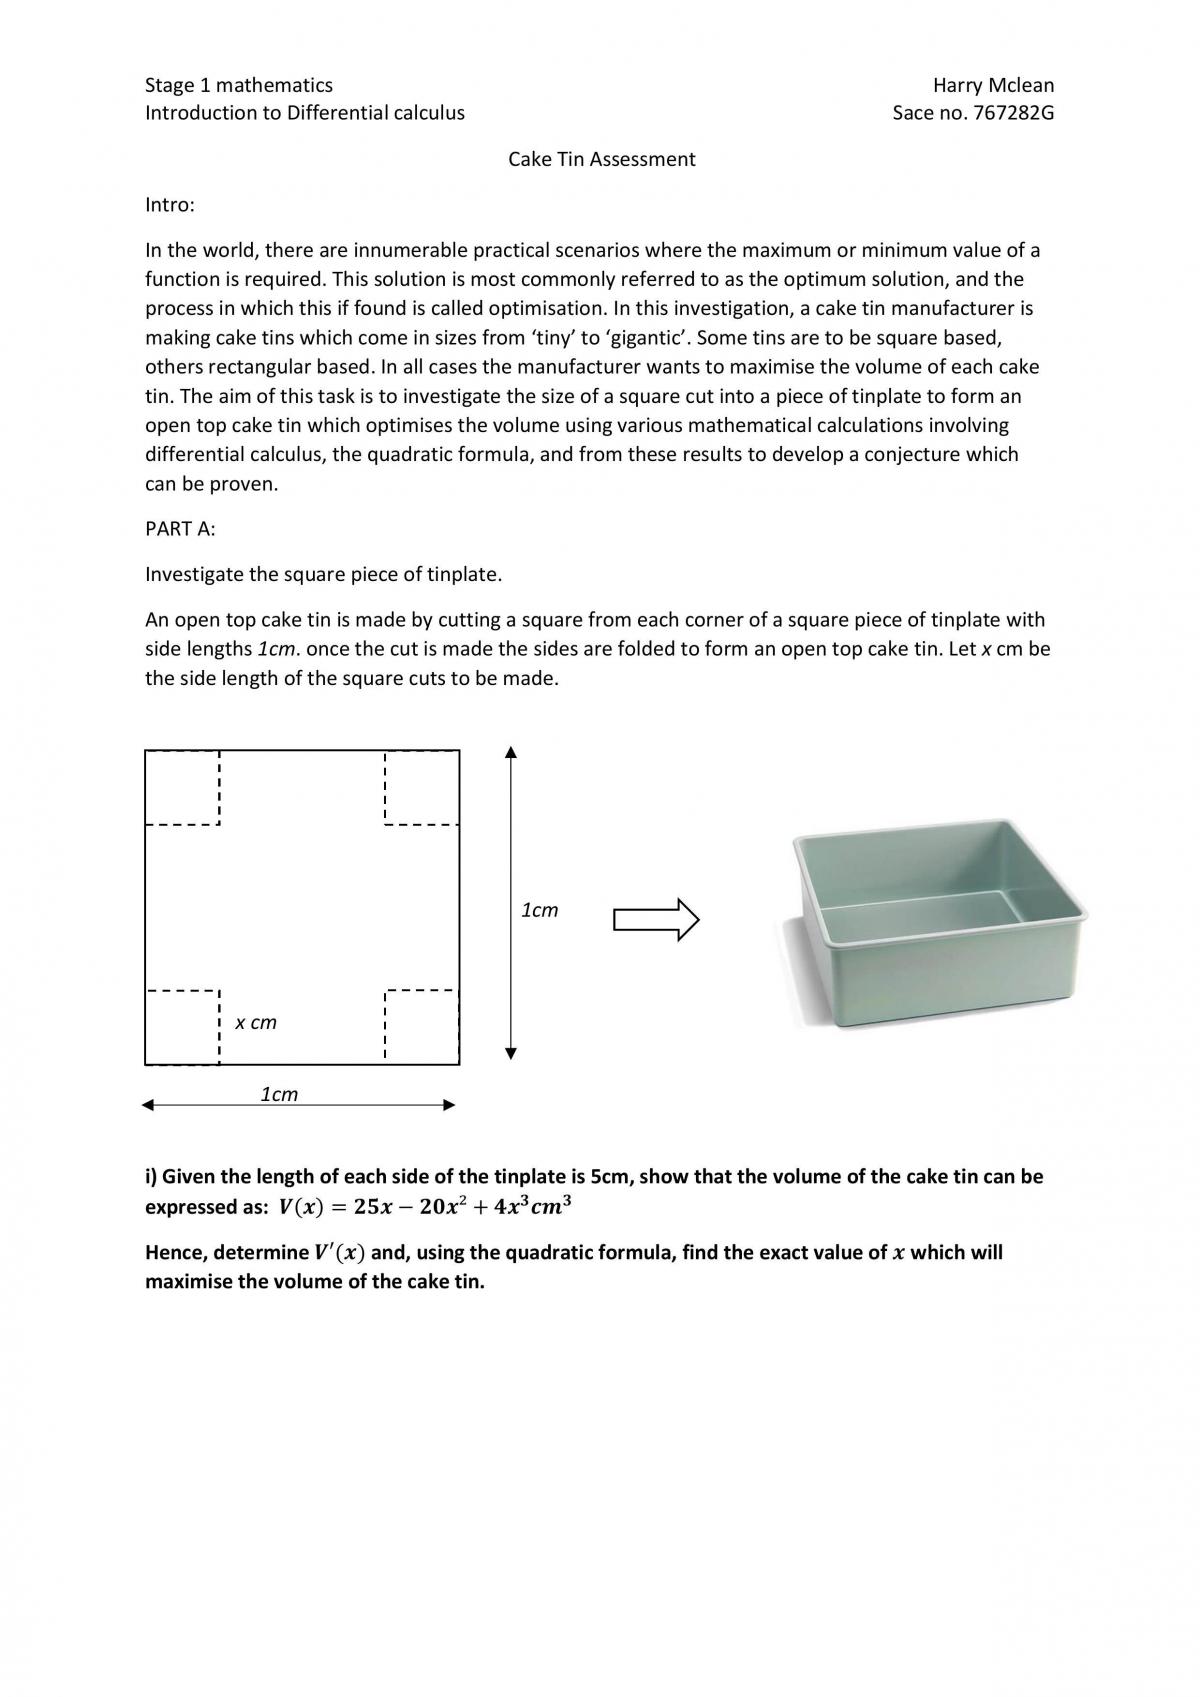 Cake tin assessment - Page 1